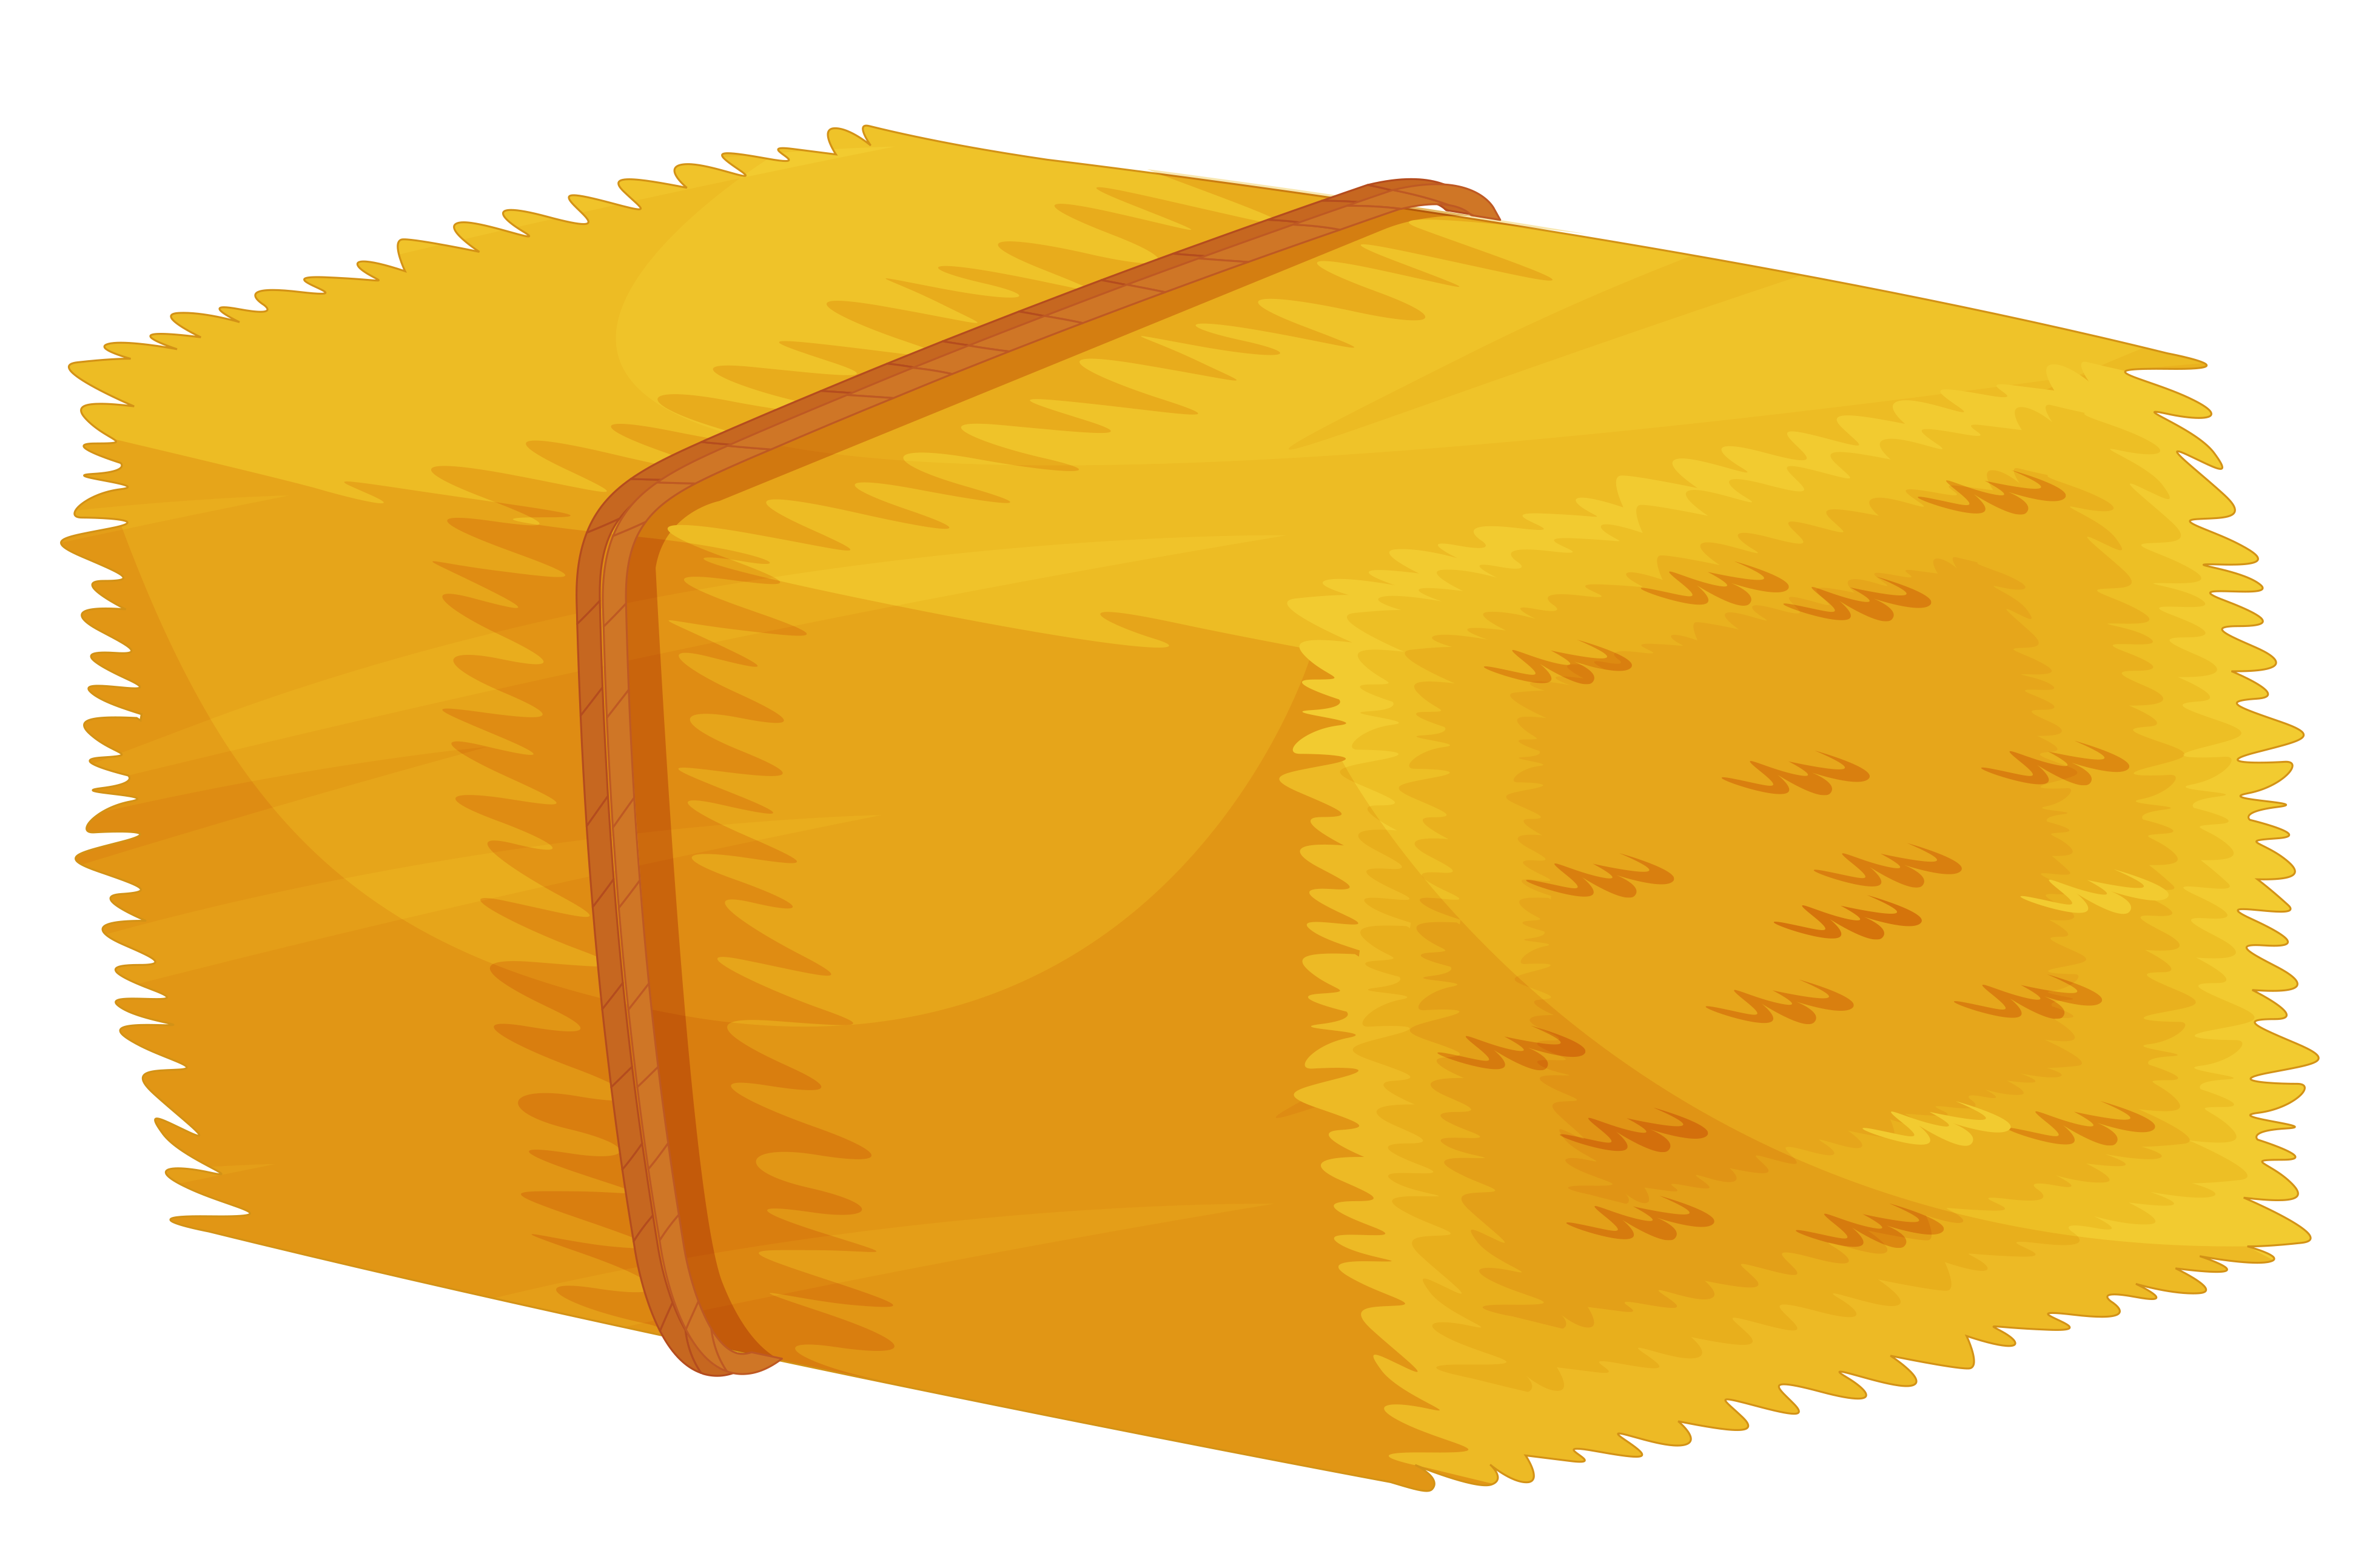  collection of hay. Square clipart orange